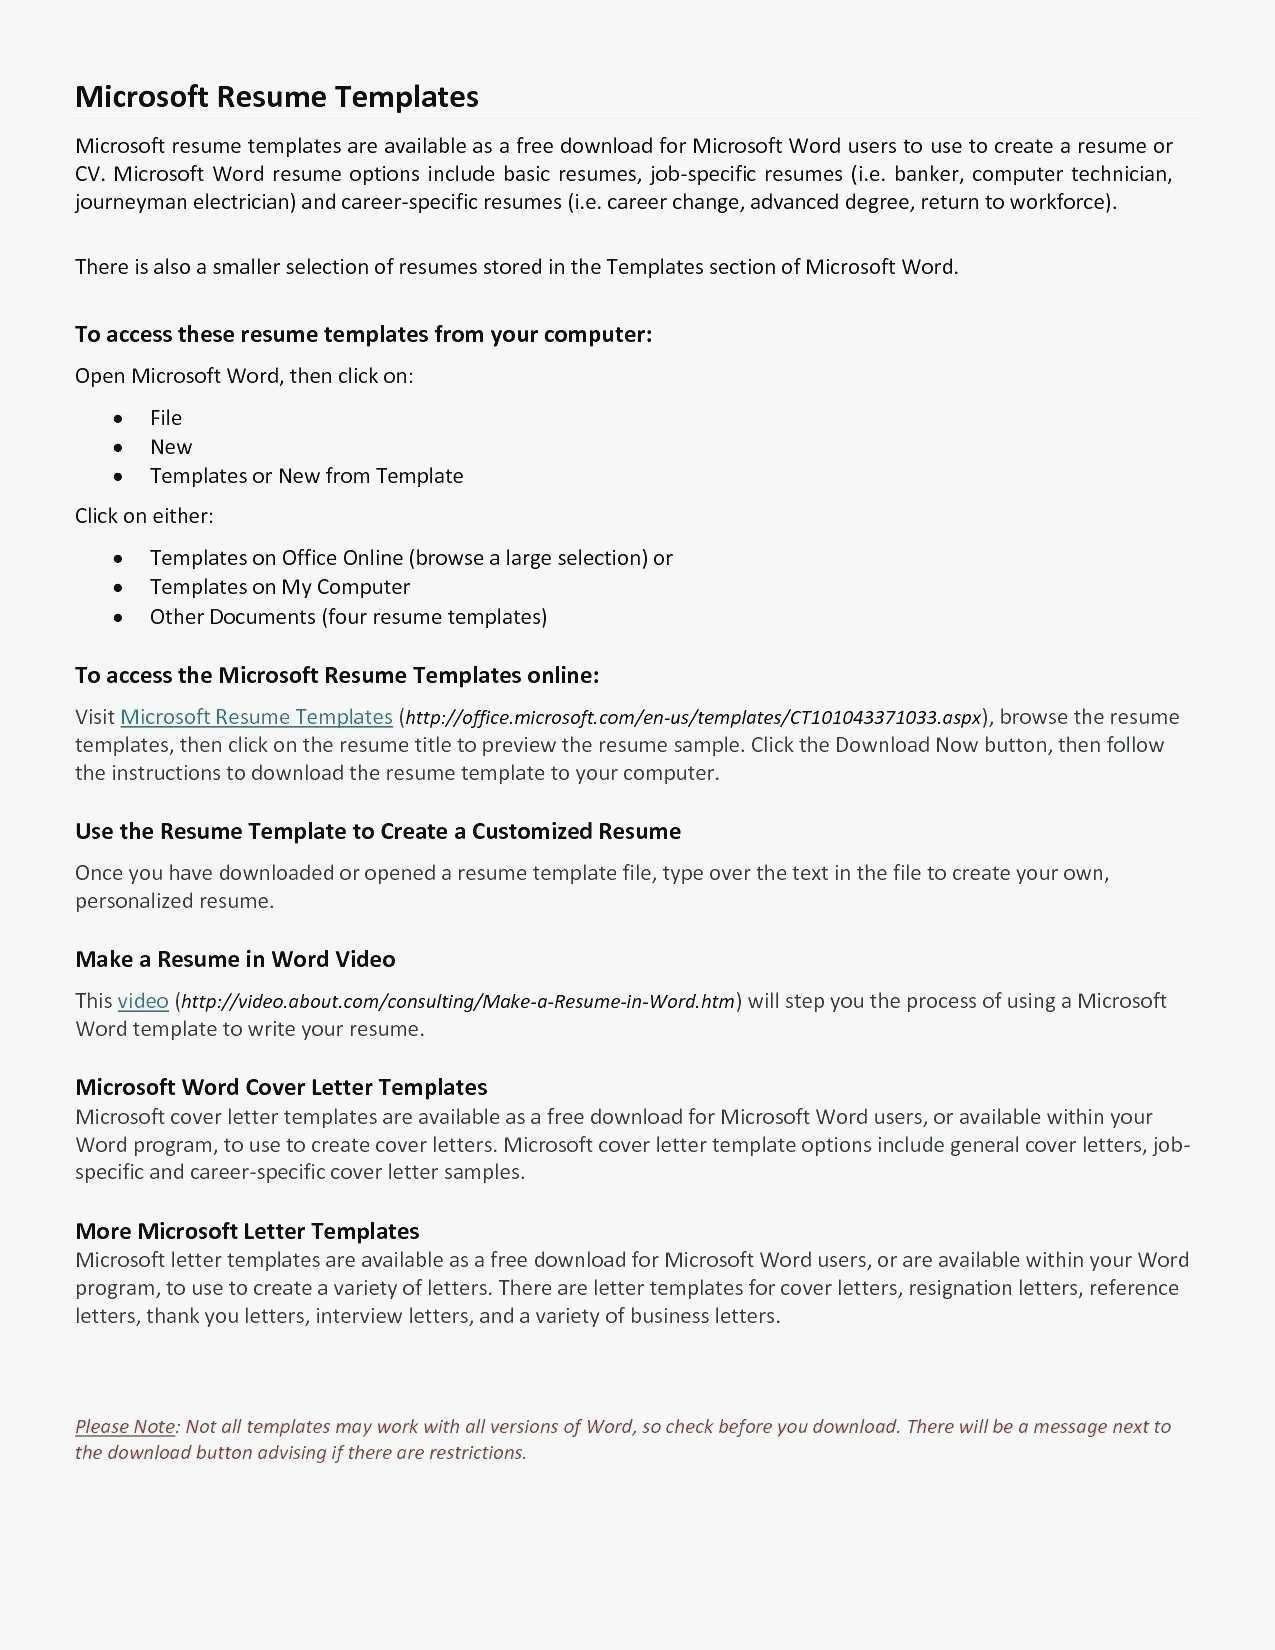 Thank You for Your Resume Template Job Interview Thank You Letter Cover Letter for Resume …